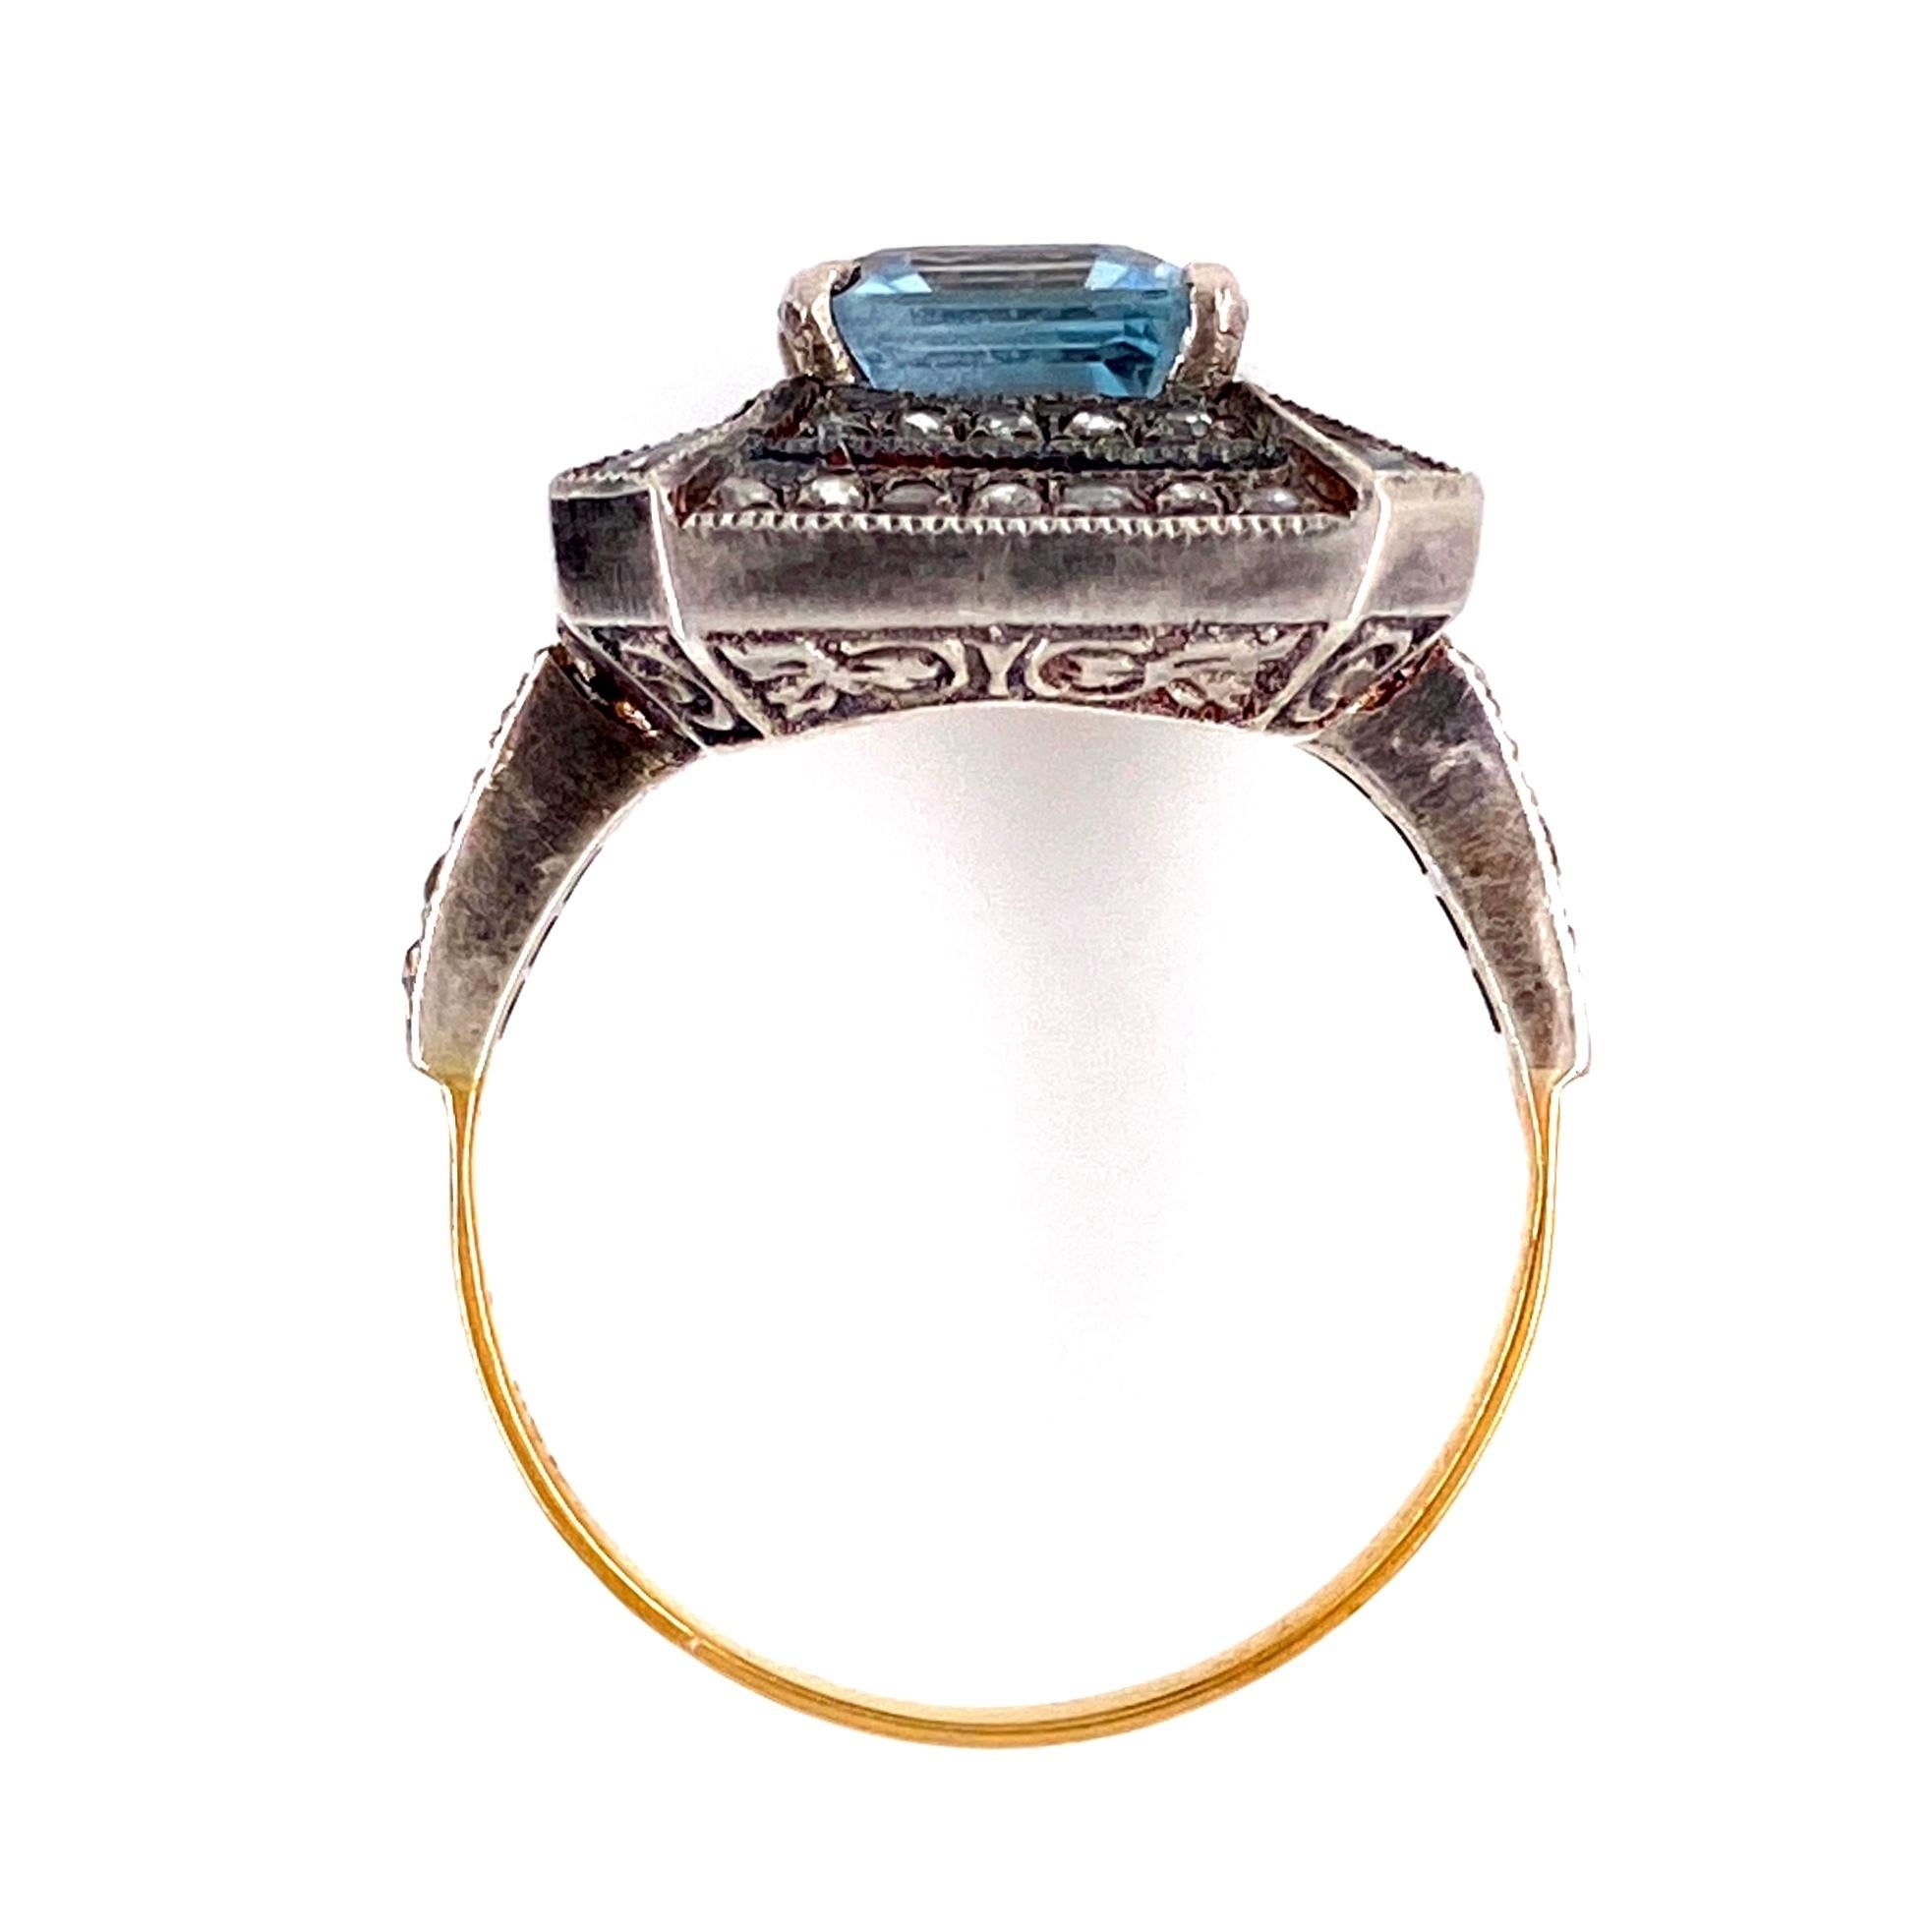 Stunning Solitaire Cocktail ring featuring a securely nestled 2.90 Carat oval Emerald-cut Aquamarine Gemstone, each corner enhanced with a Kite-shaped Aquamarines, weighing approx. 0.20 tctw and 62 Rose-cut Diamonds, weighing approx. 0.60 tcw;